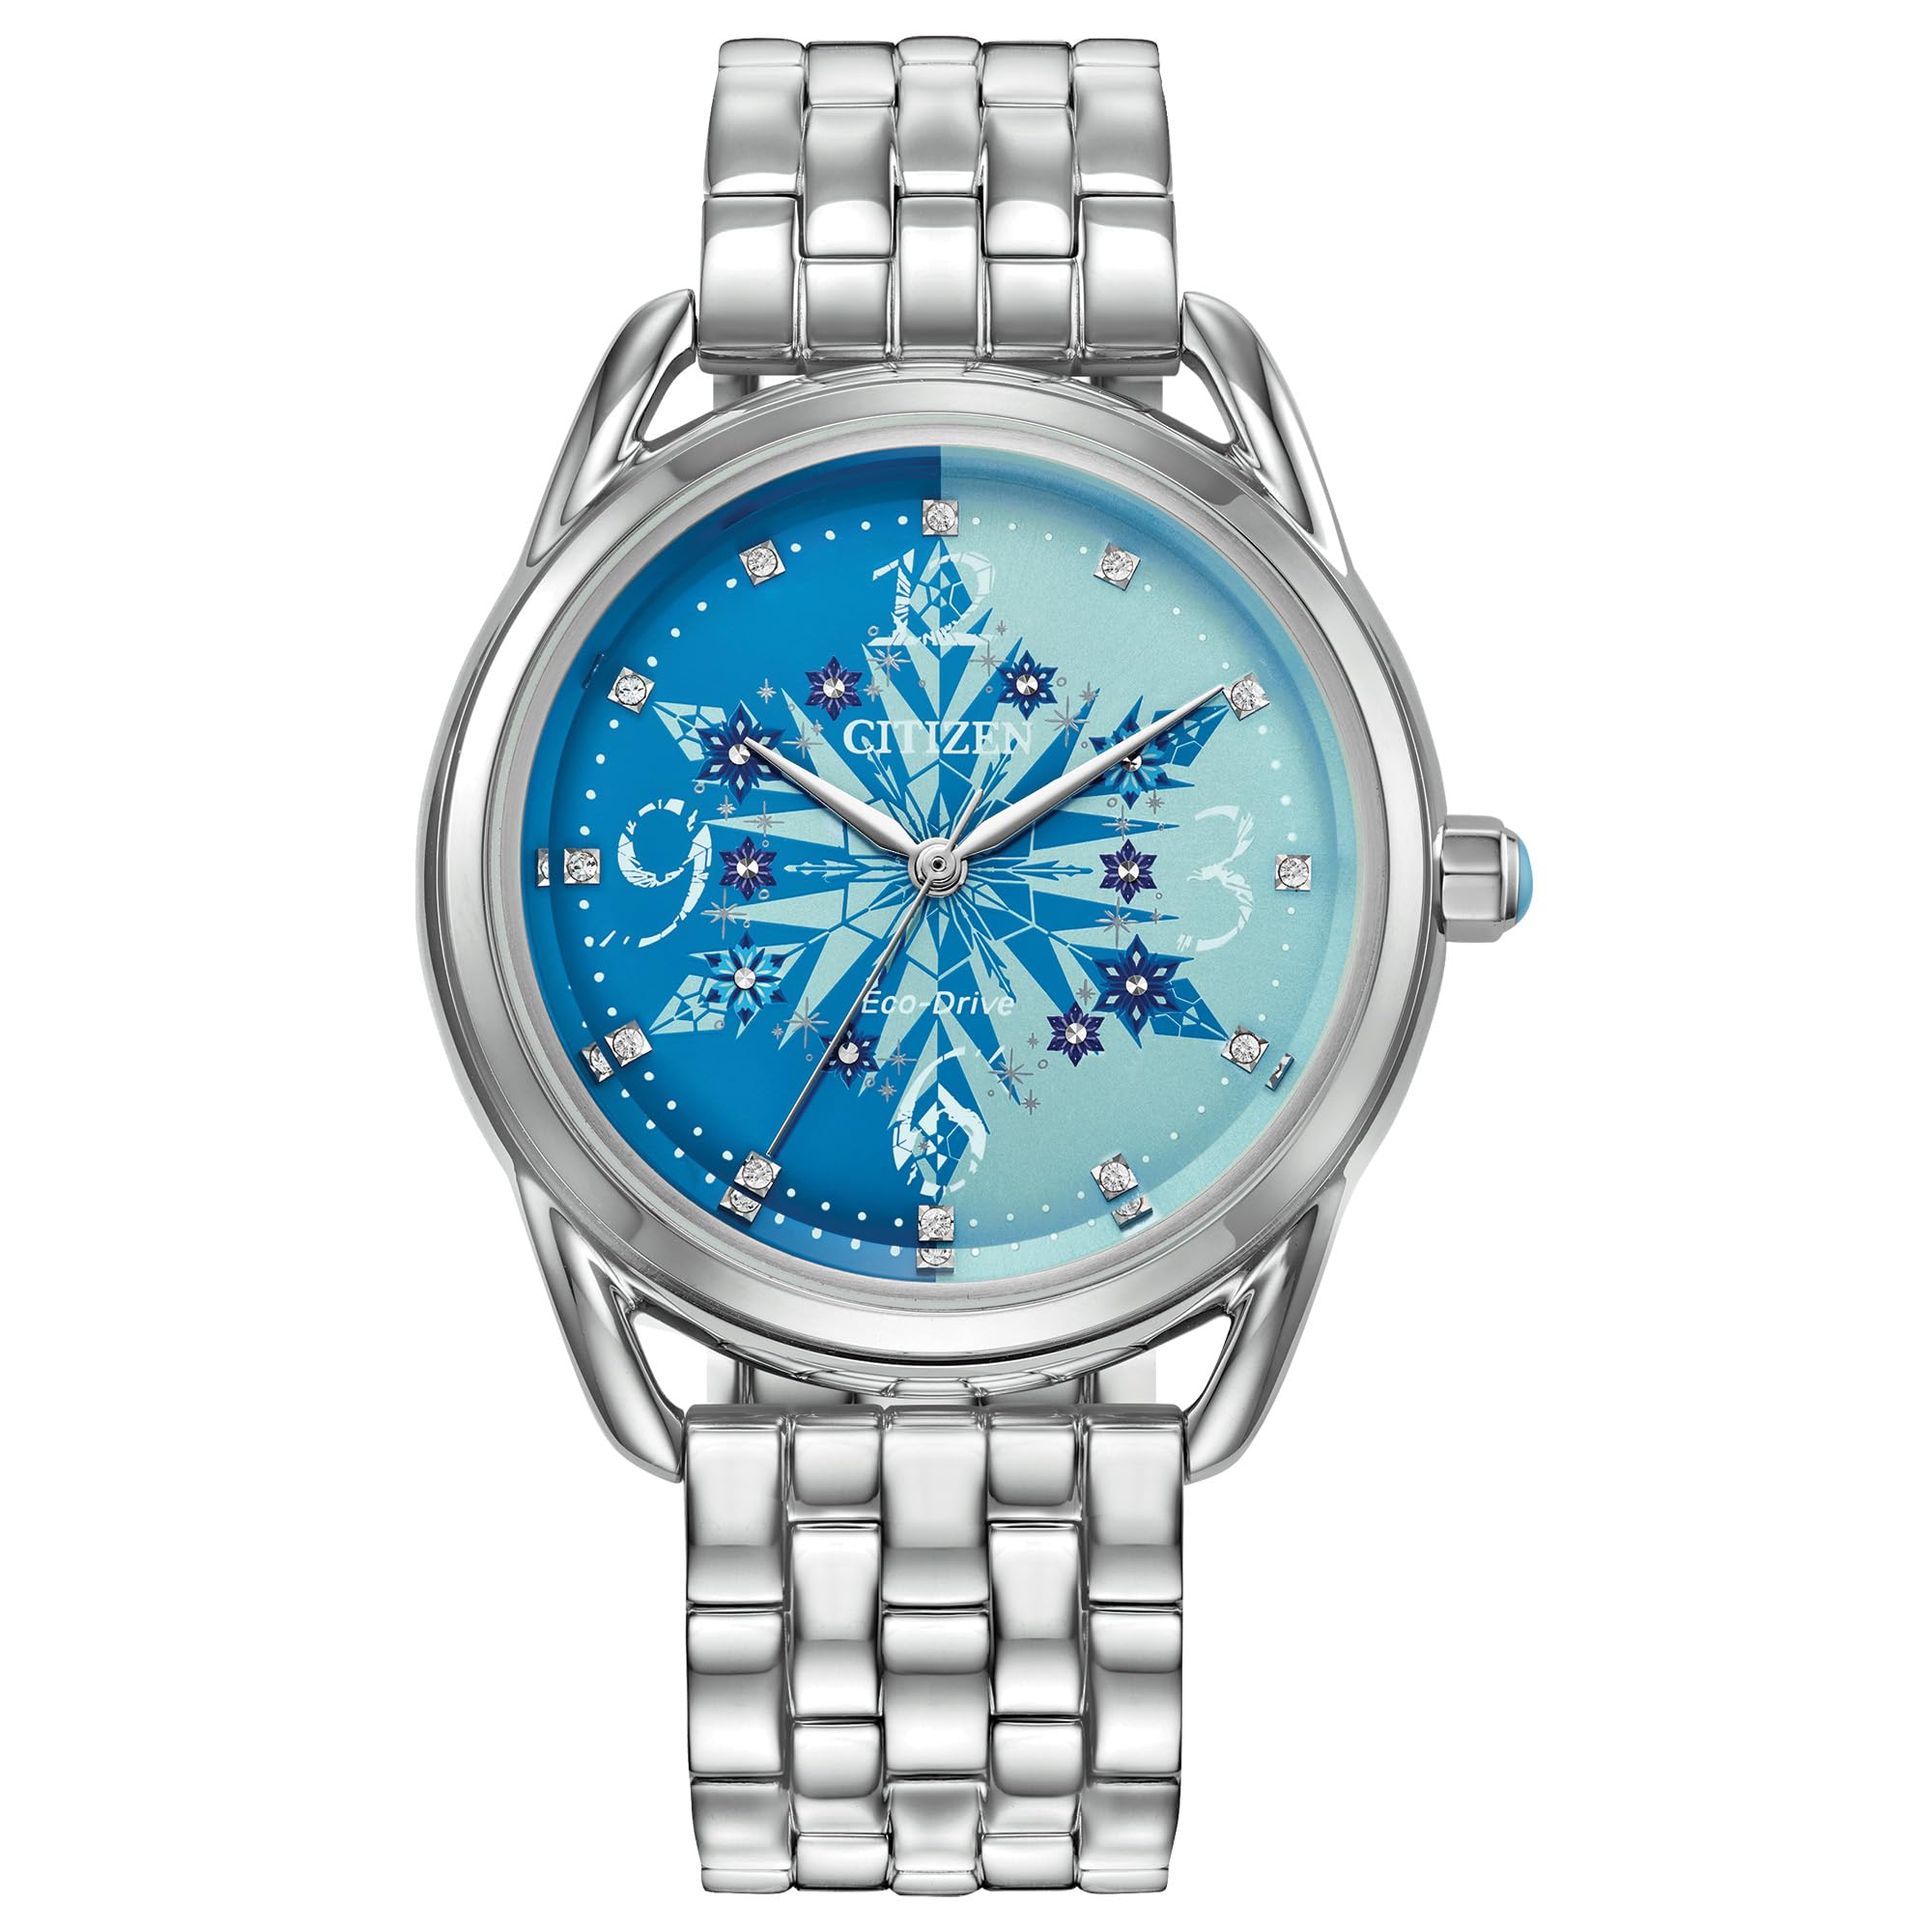 Citizen Women's Eco-Drive Disney Princess Frozen Crystal Watch and Pin Gift Set in Silver Stainless Steel Watch, Blue Dial (Model: FE7091-61W)